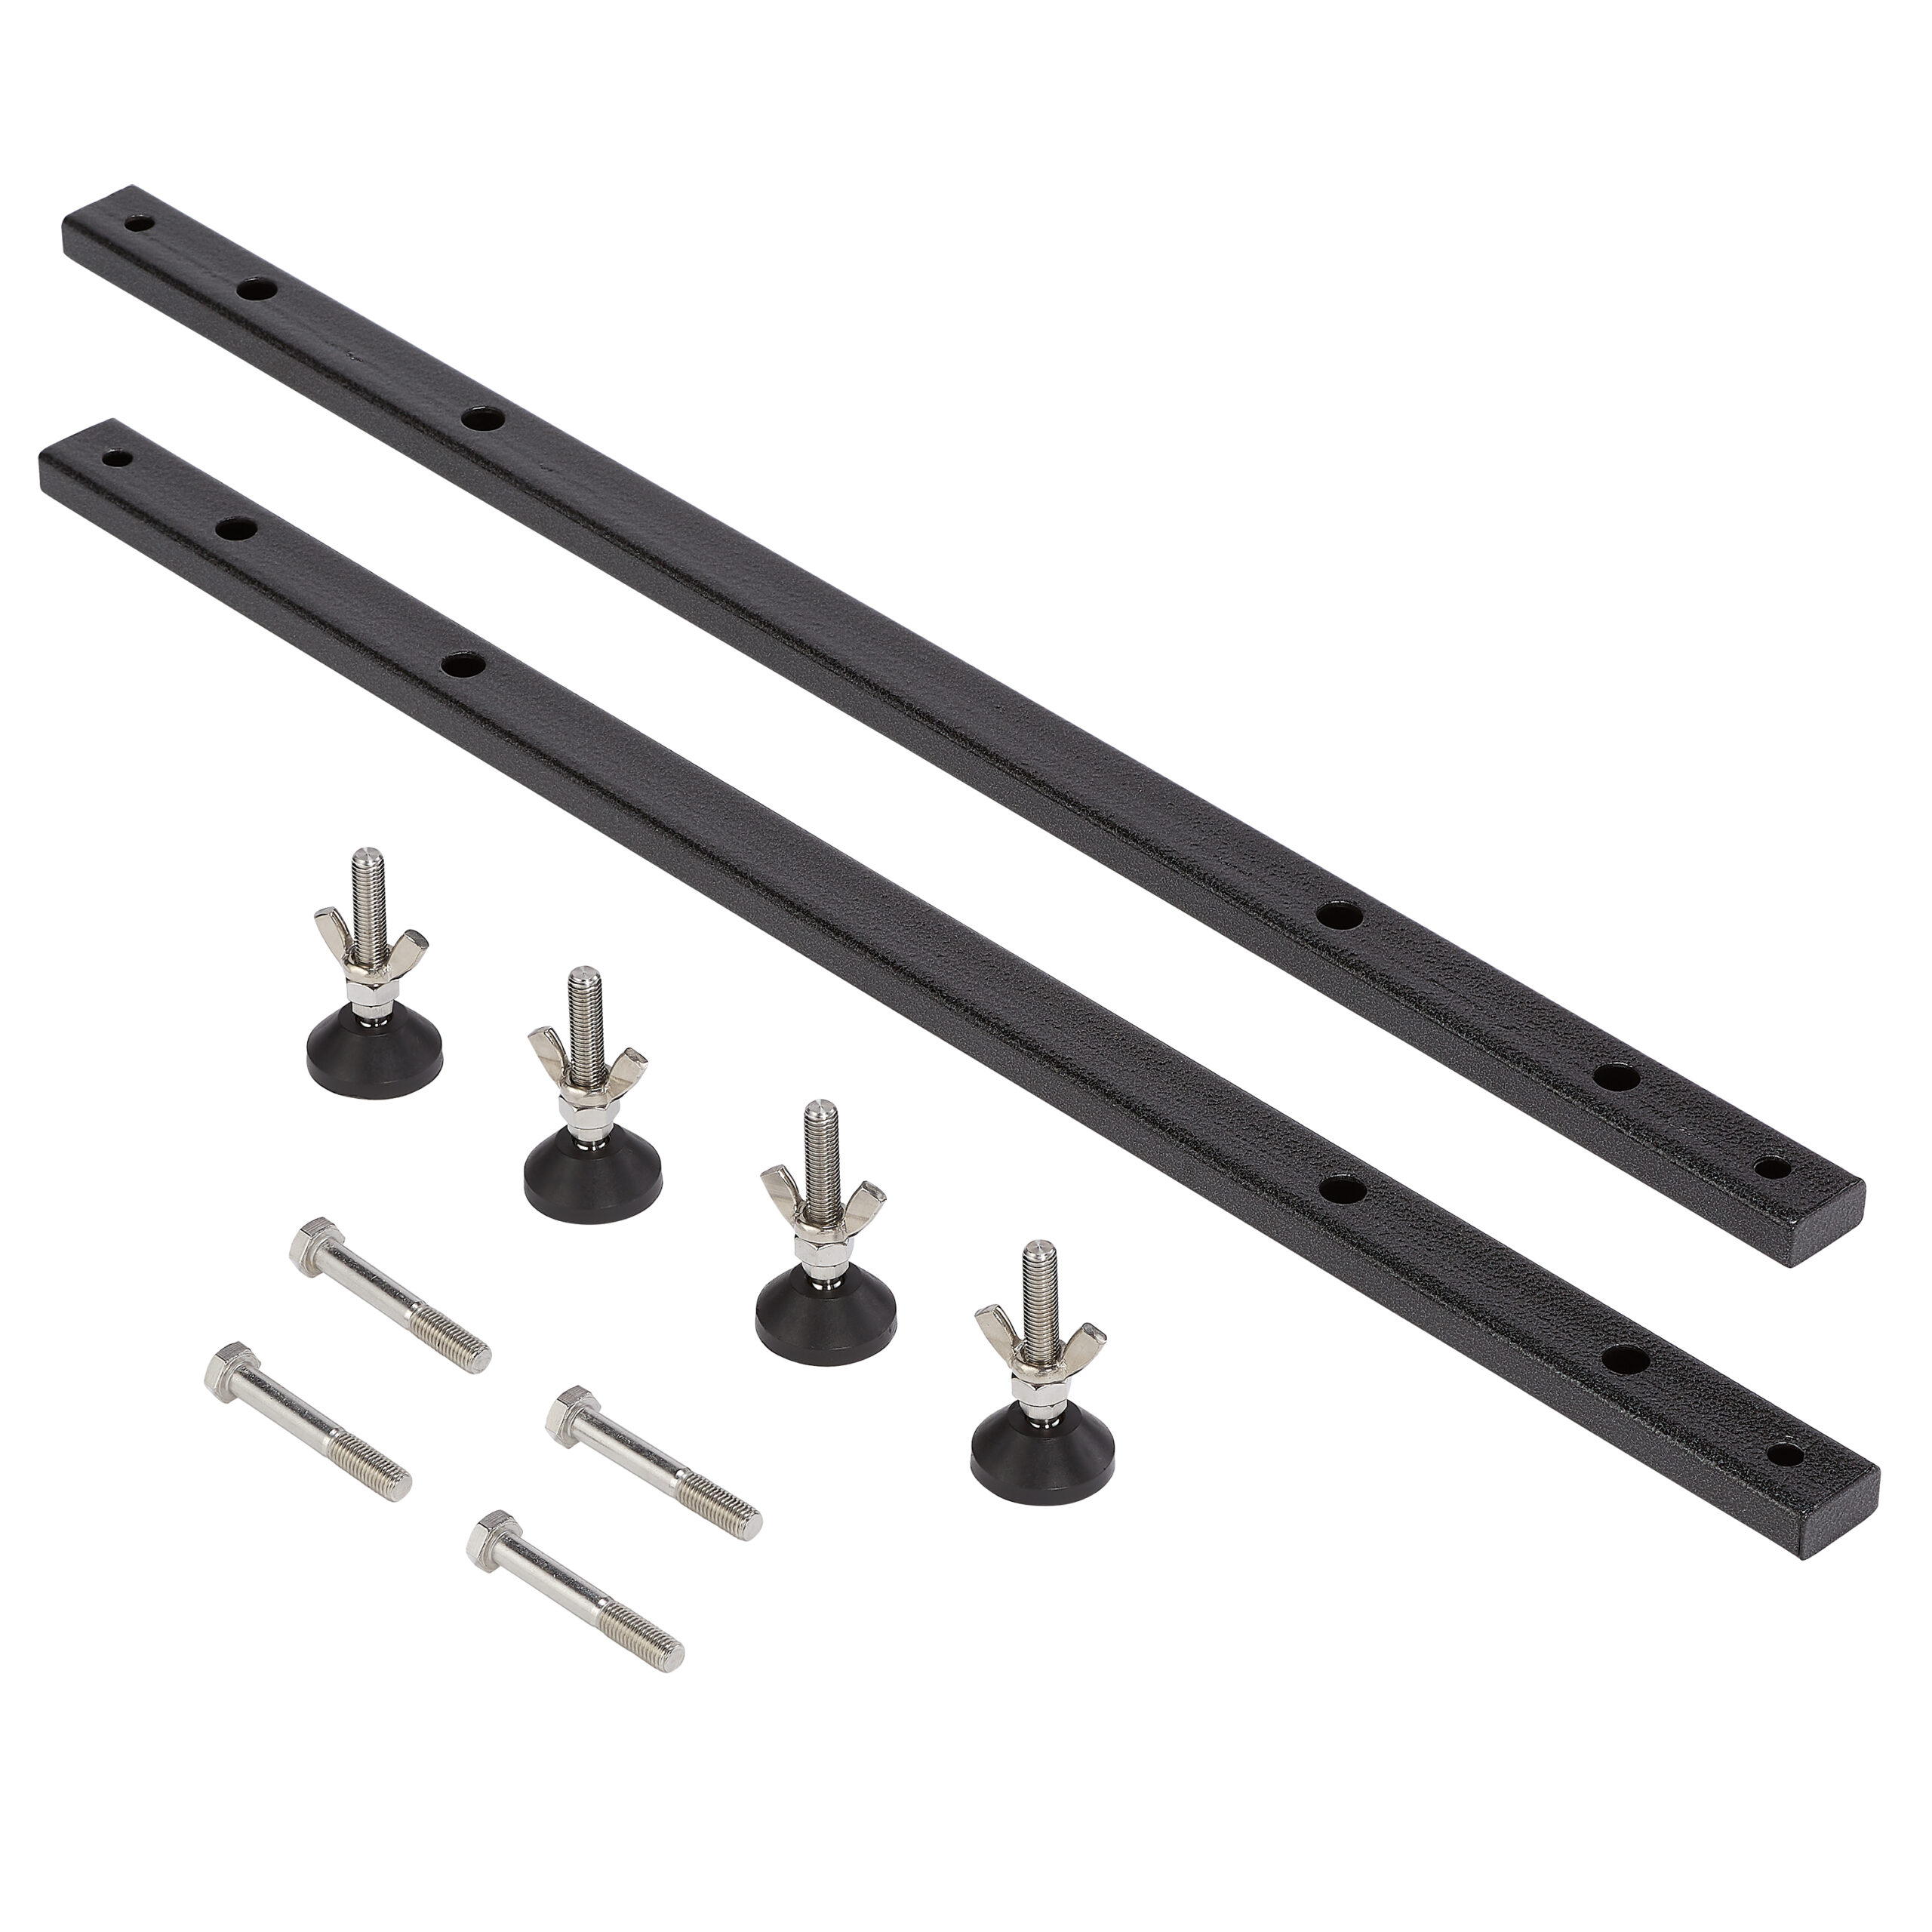 Airsled's Spacer Kit for Appliances on Legs - Airsled